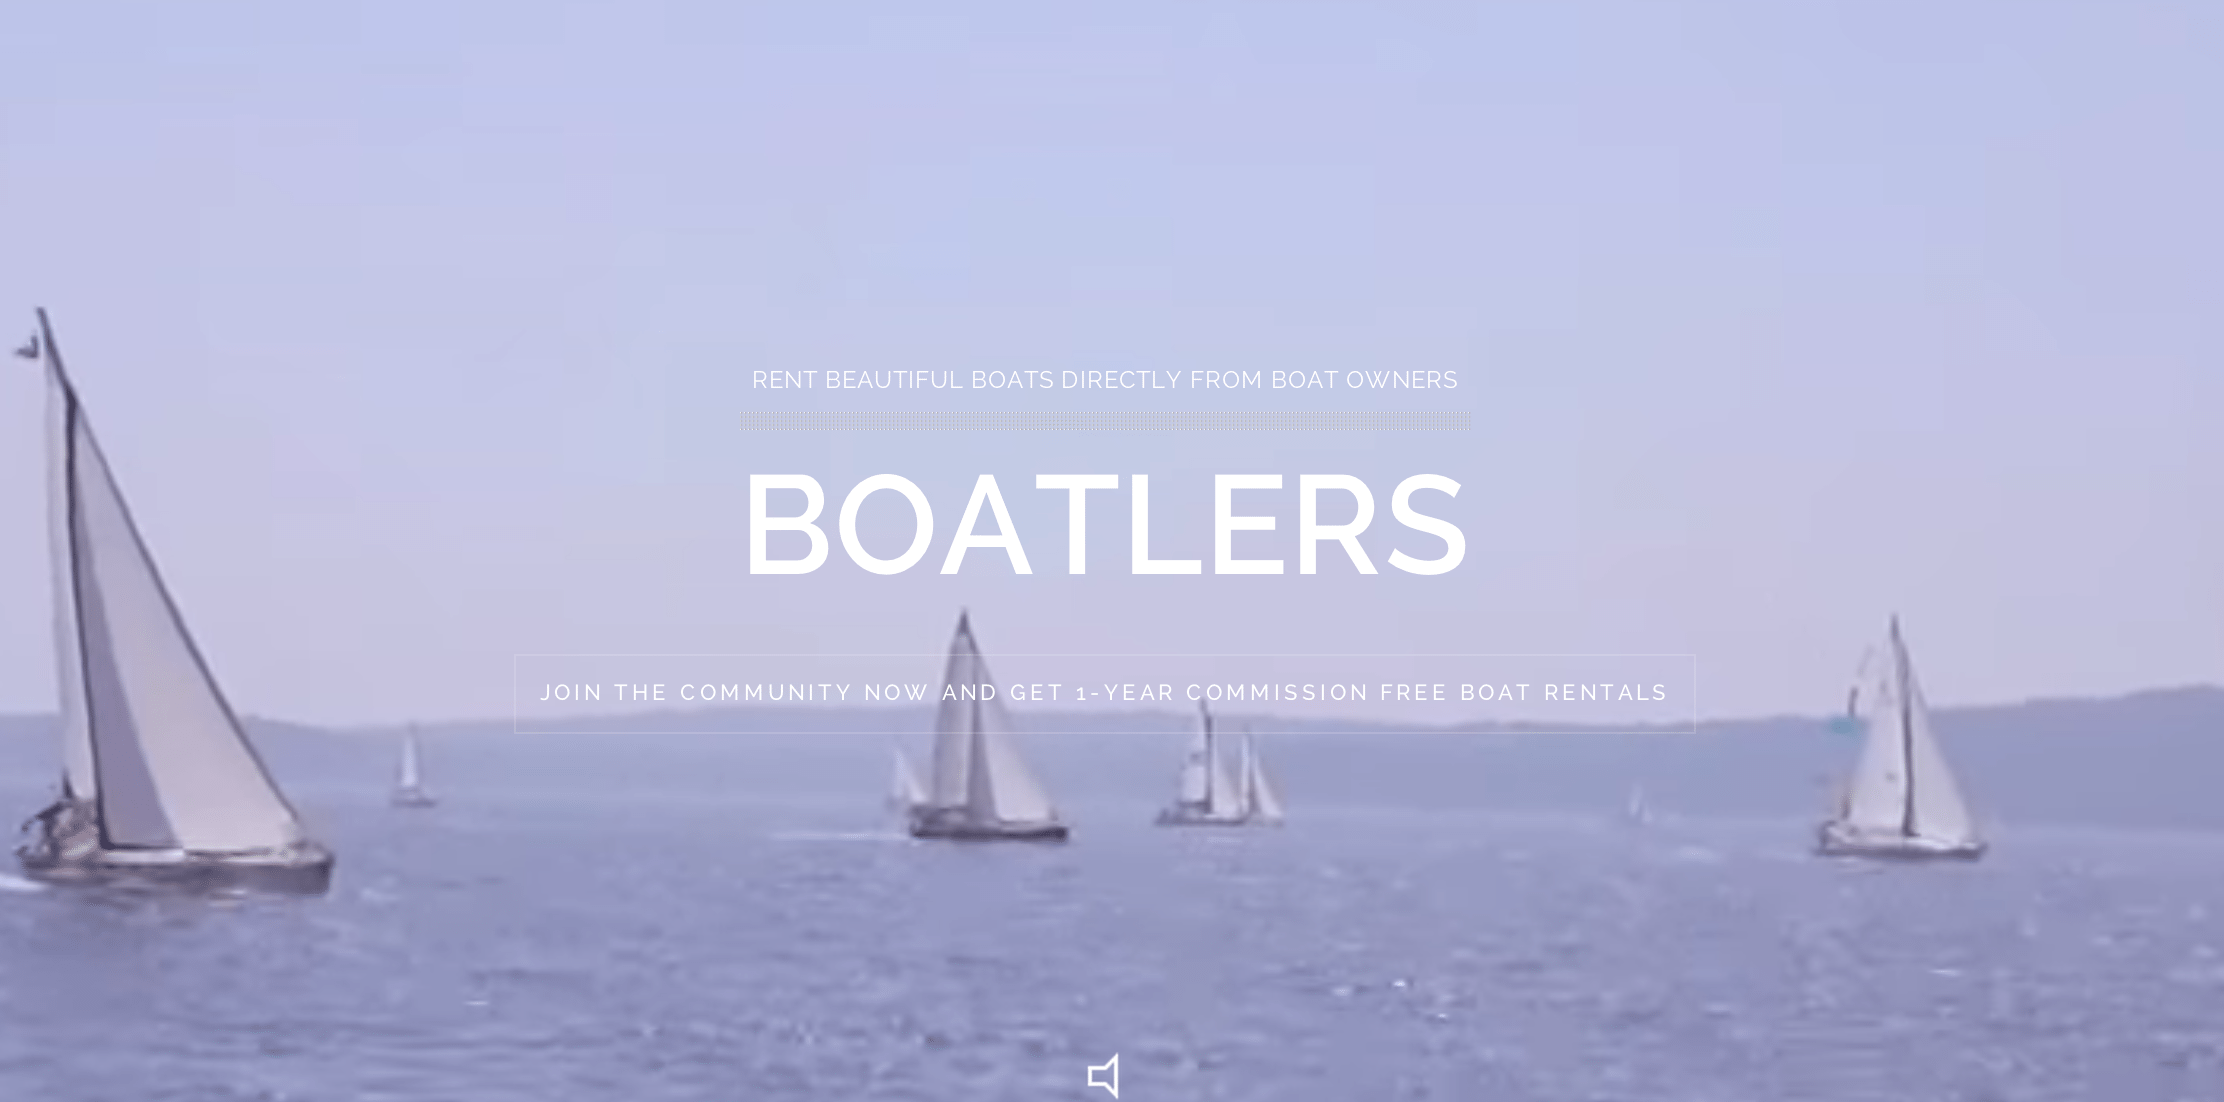 Boatlers is a worldwide peer-to-peer boat rental platform that connects boat owners to renters directly on its website.